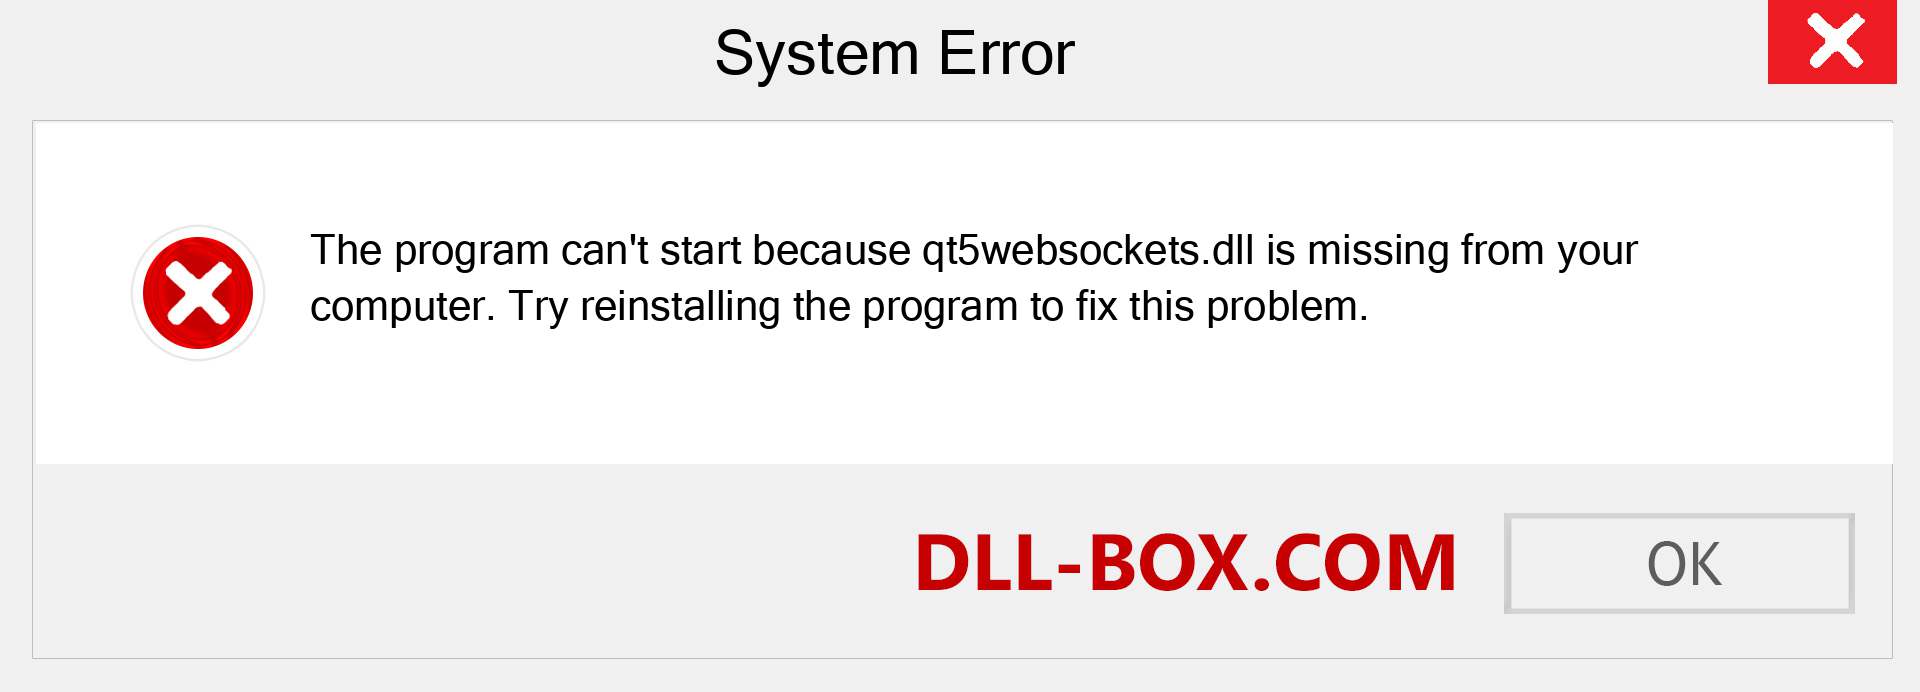  qt5websockets.dll file is missing?. Download for Windows 7, 8, 10 - Fix  qt5websockets dll Missing Error on Windows, photos, images